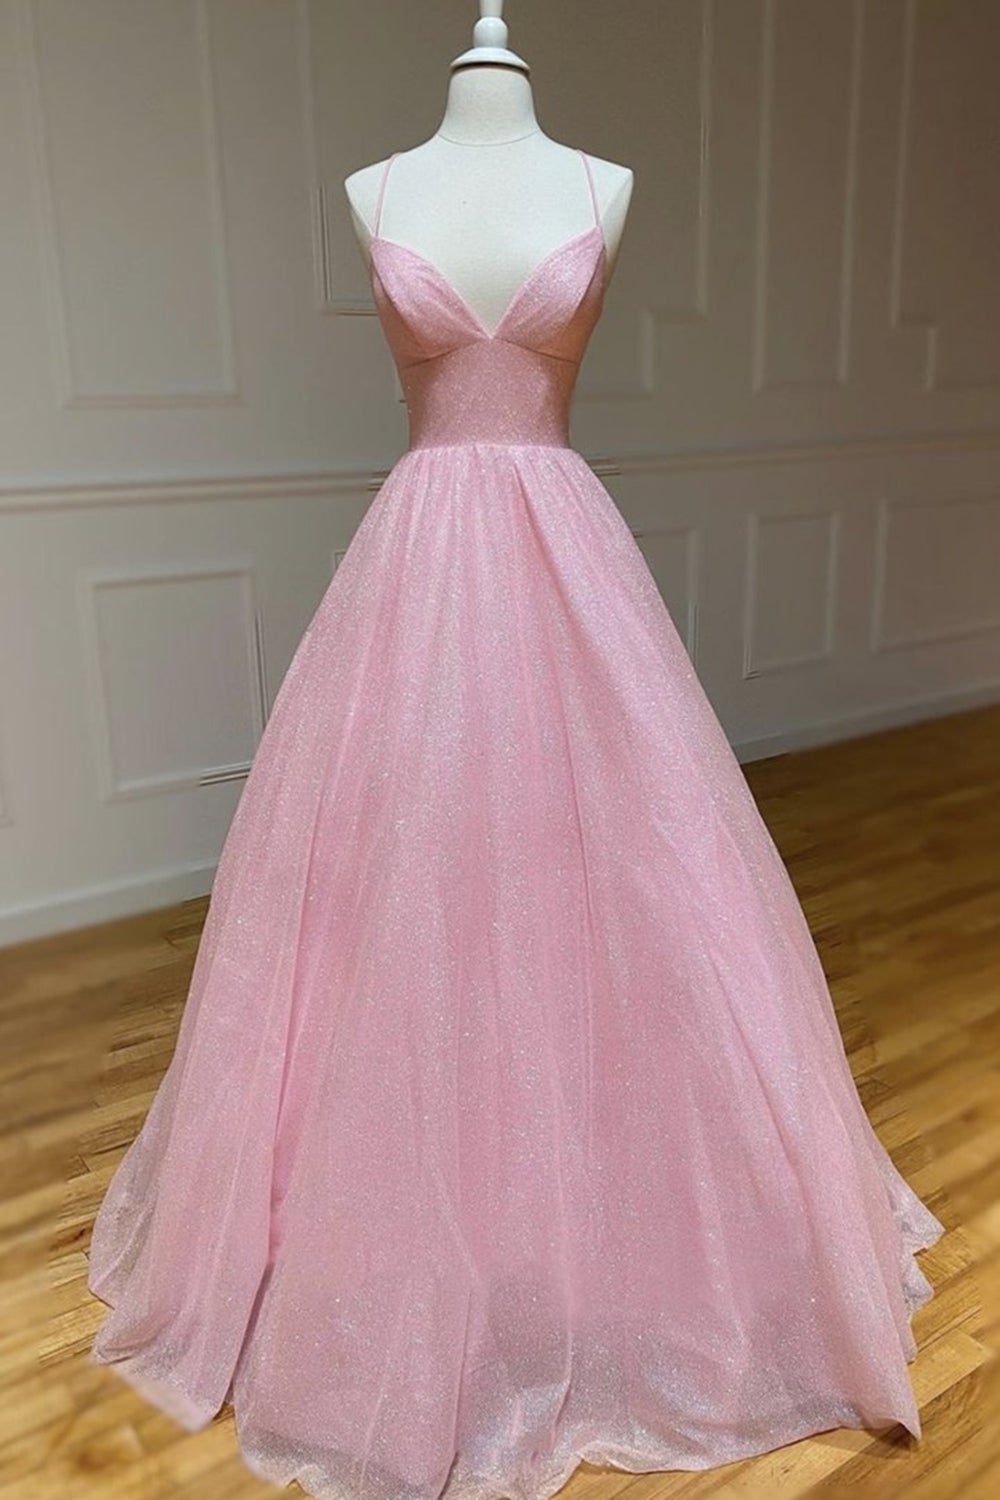 Party Dress In Store, Shiny V Neck Backless Pink Long Prom Dress, Formal Graduation Evening Dresses